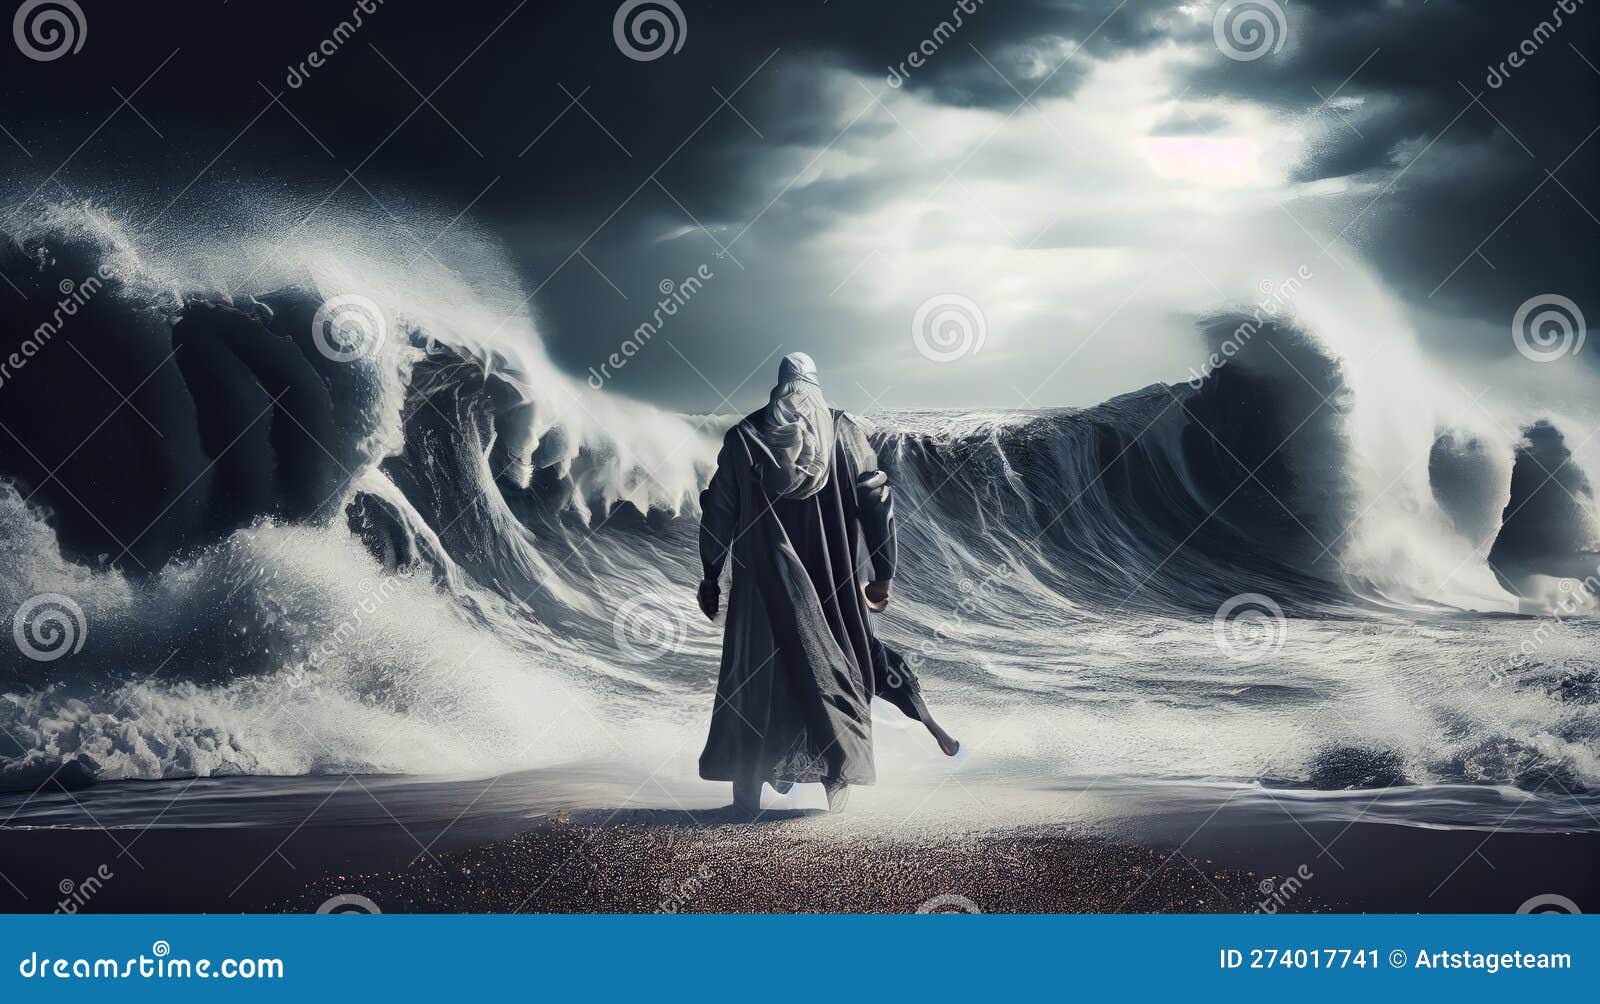 2250192 Red Sea Images Stock Photos  Vectors  Shutterstock